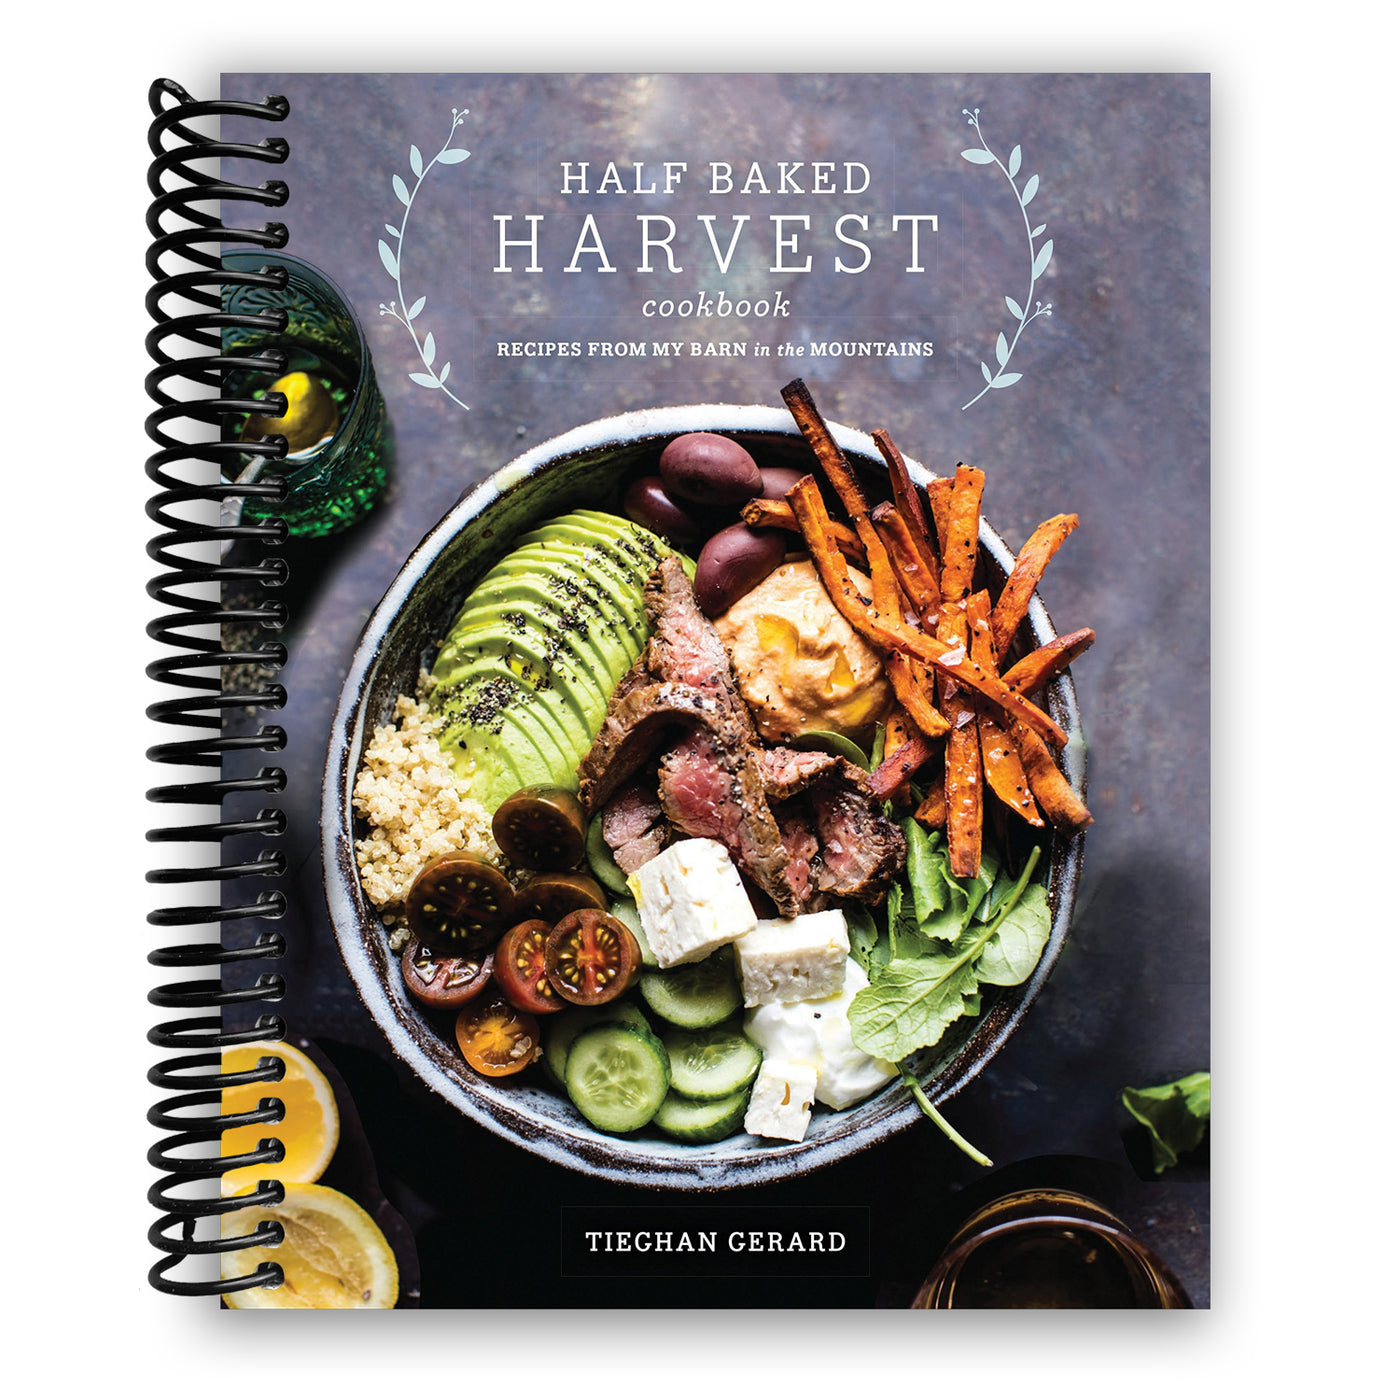 Half Baked Harvest Cookbook: Recipes from My Barn in the Mountains (Spiral Bound)